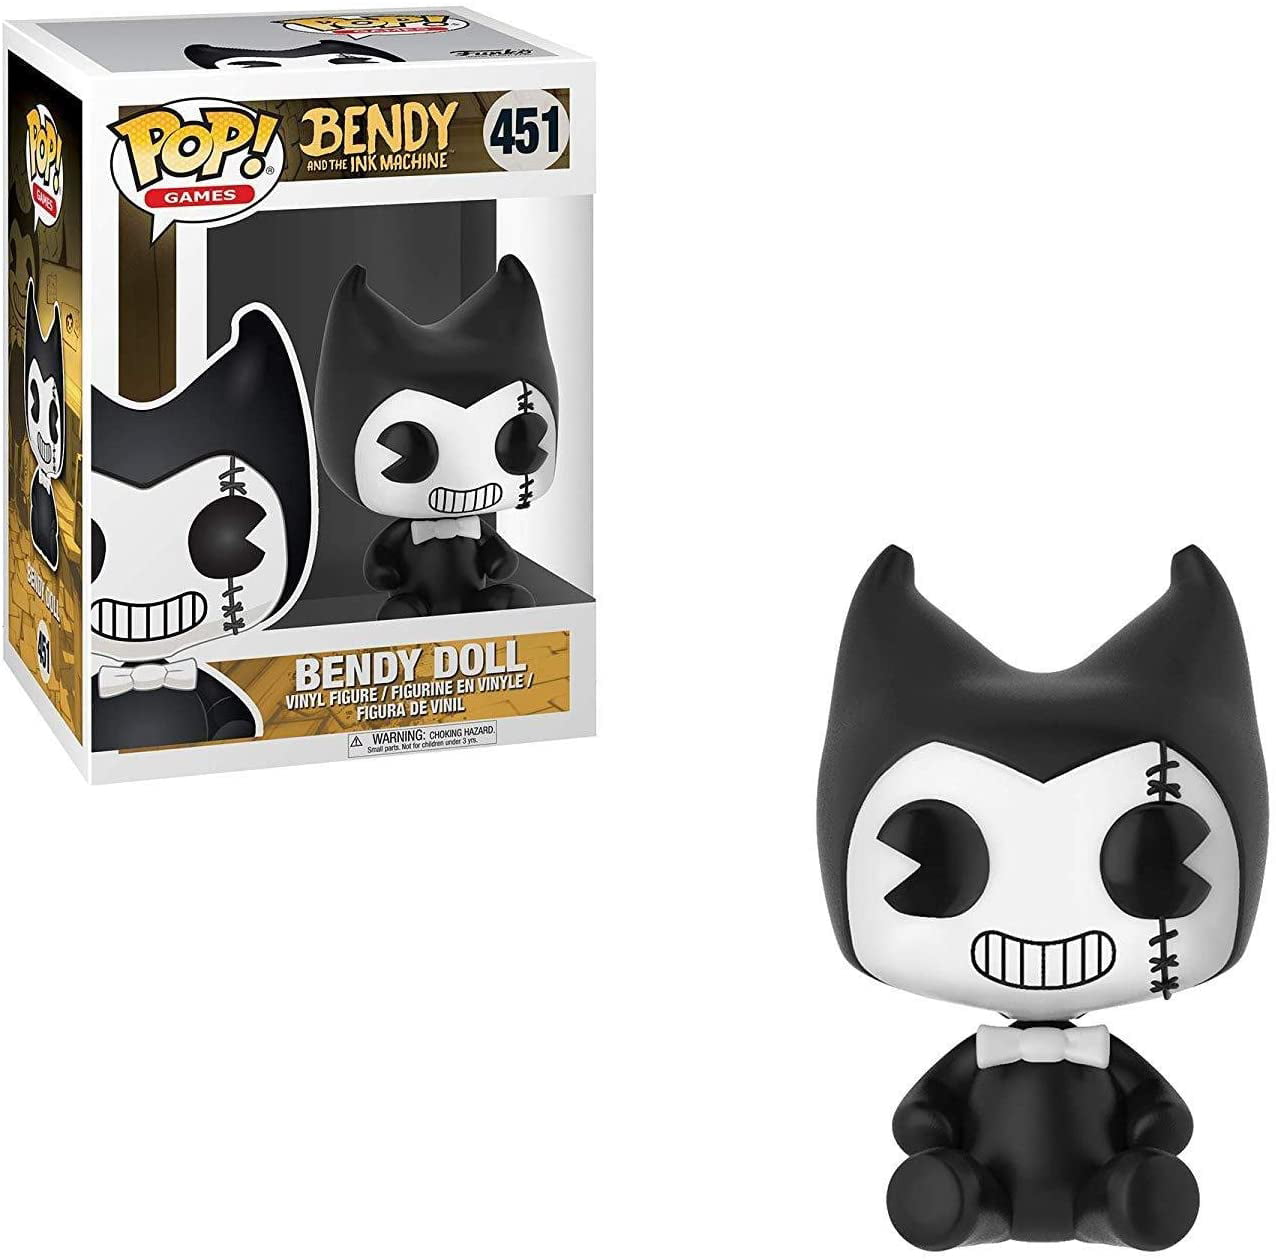 Funko Pop Bendy Doll Bendy and the Ink Machine 